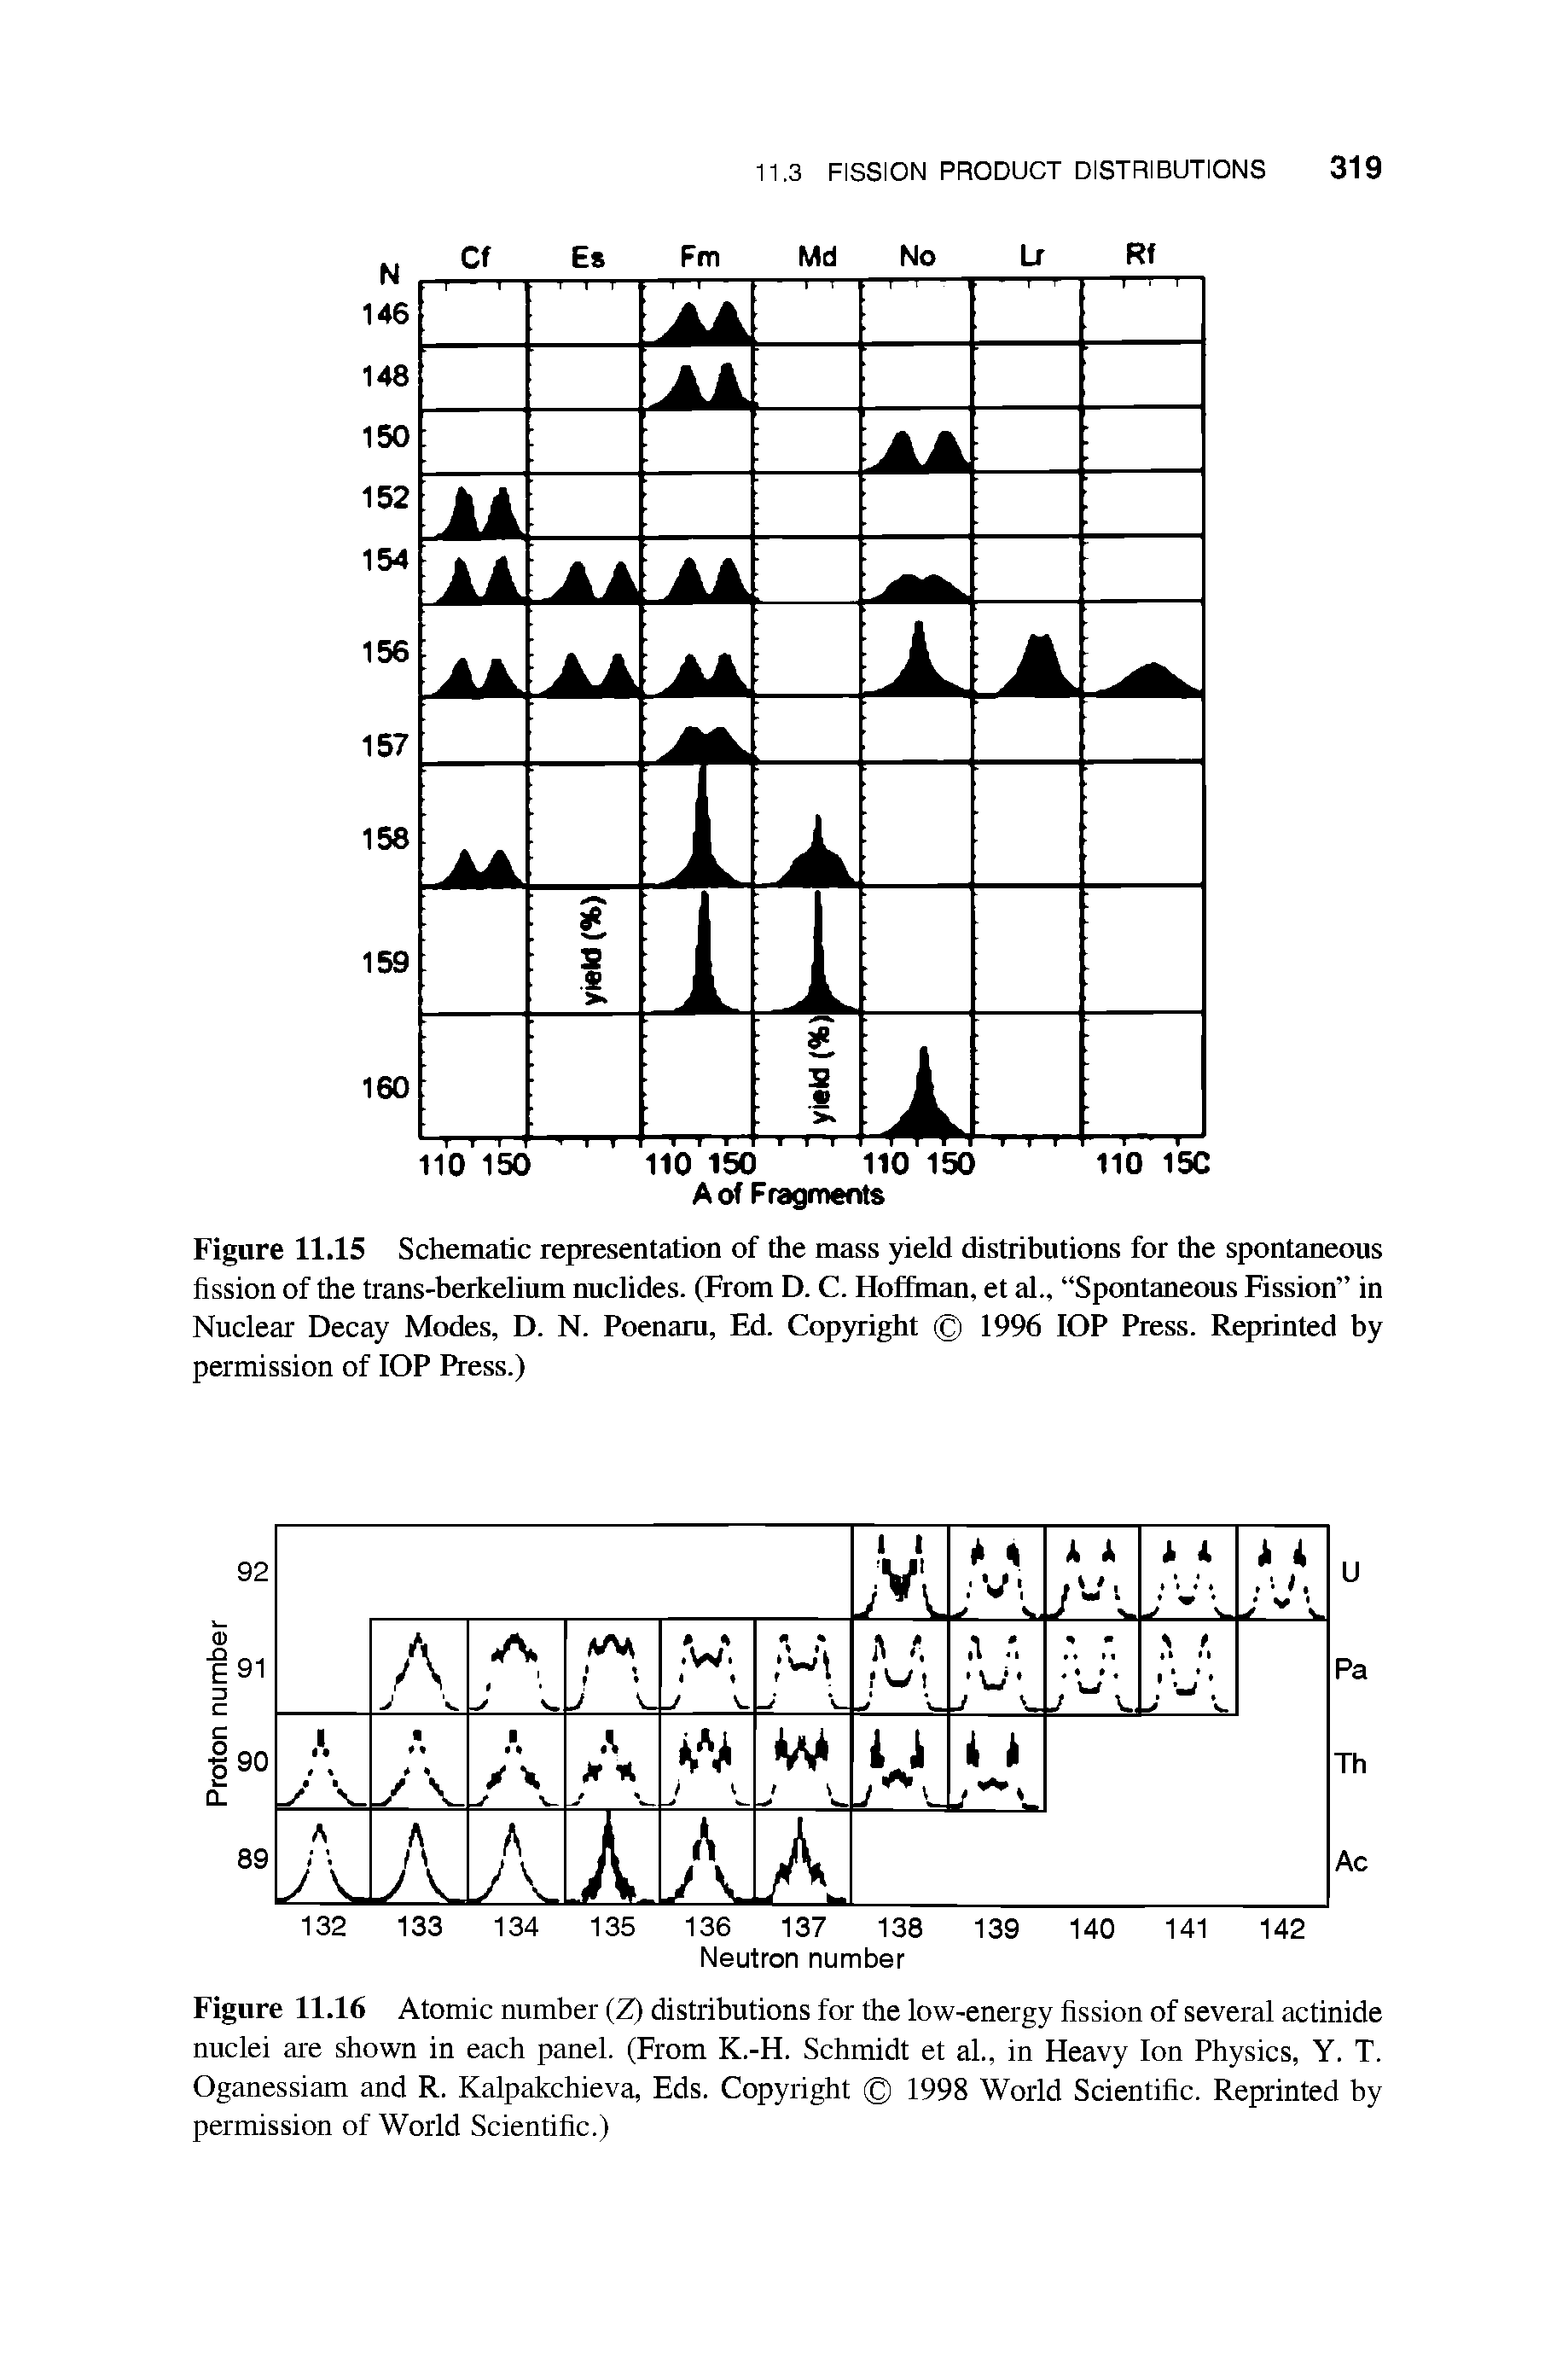 Figure 11.16 Atomic number (Z) distributions for the low-energy fission of several actinide nuclei are shown in each panel. (From K.-H. Schmidt et al., in Heavy Ion Physics, Y. T. Oganessiam and R. Kalpakchieva, Eds. Copyright 1998 World Scientific. Reprinted by permission of World Scientific.)...